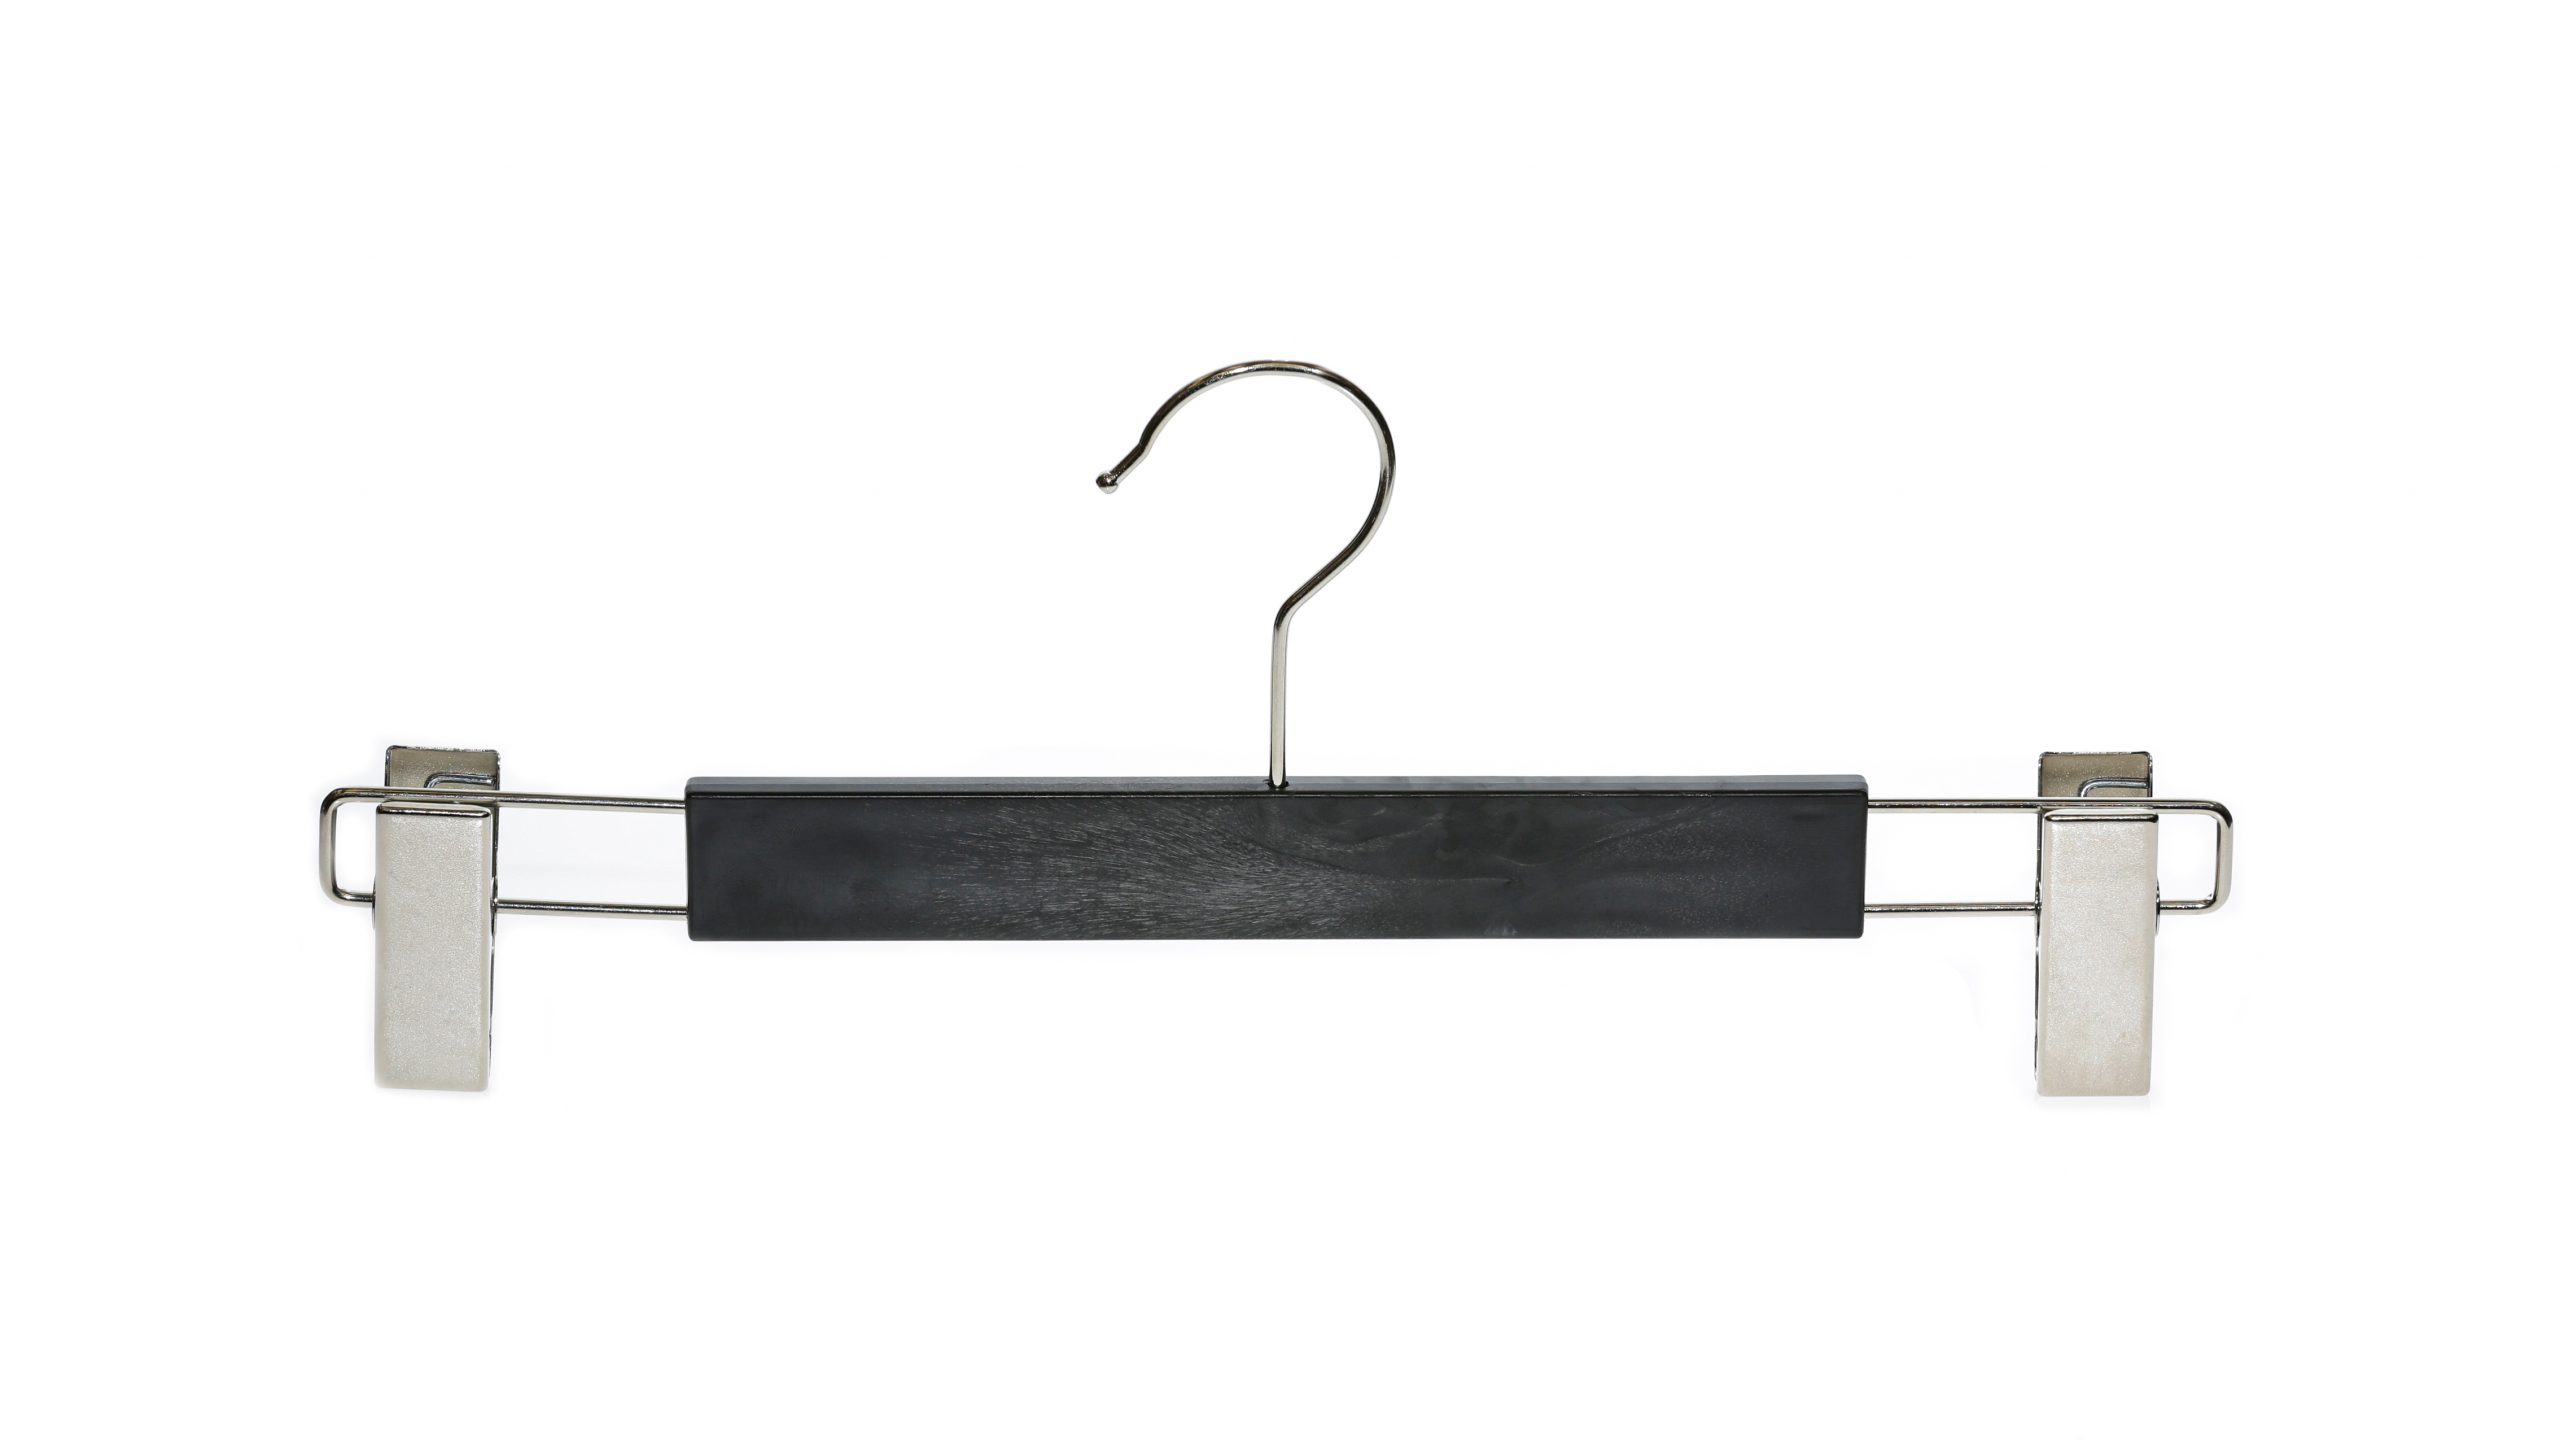 https://clothes-hangers.com/wp-content/uploads/2020/09/Wooden-Trouser-Hangers-with-Clips-Black-1-scaled.jpg